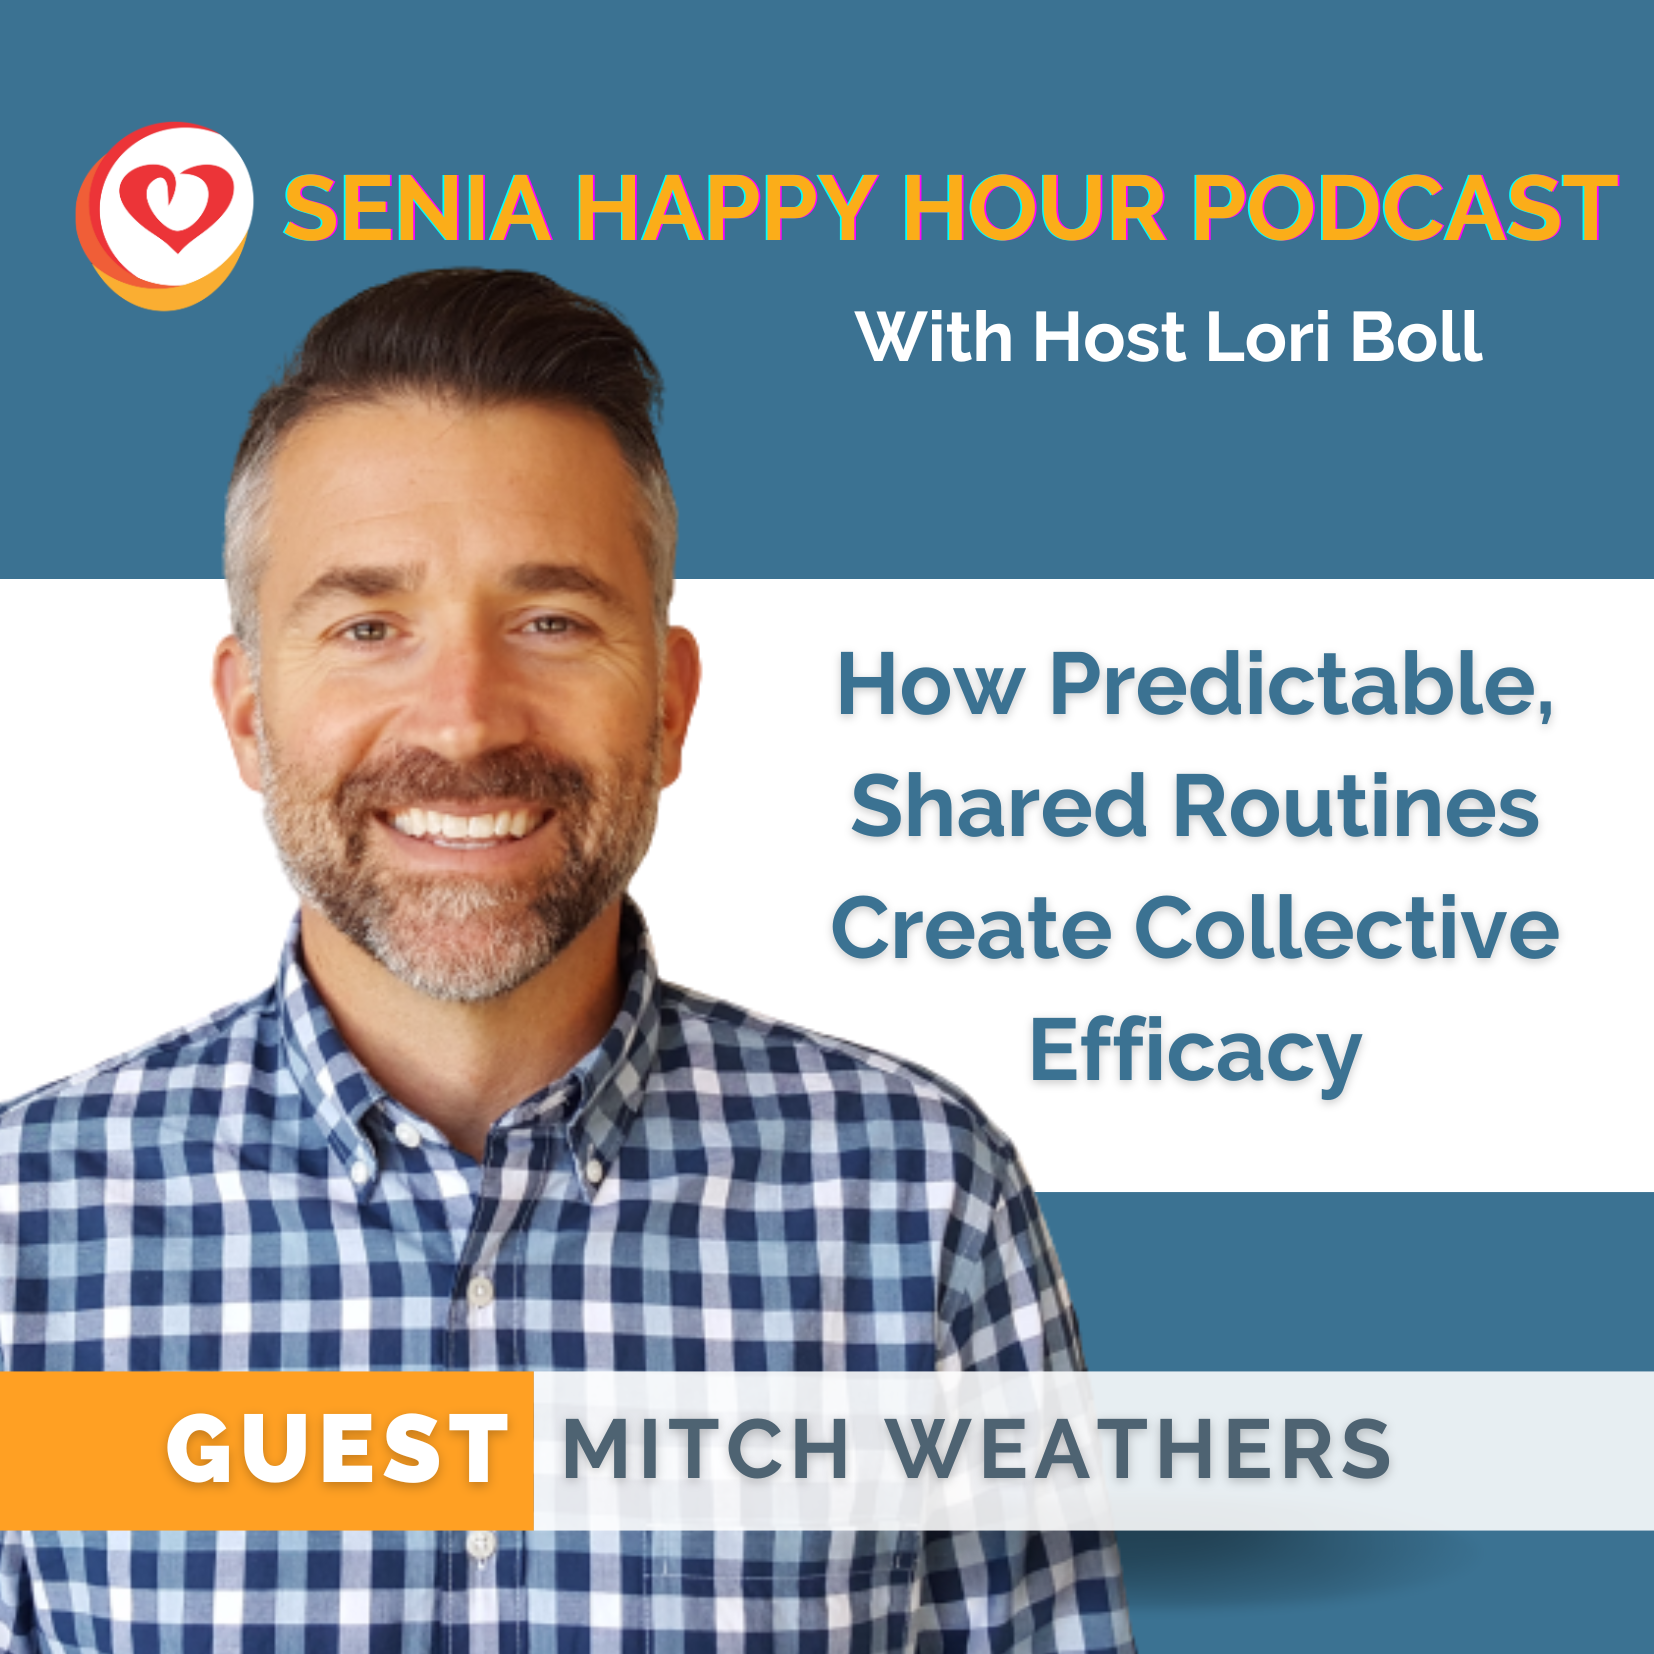 Poster for SENIA Happy Hour Podcast with Host Lori Boll, titled ''How Predictable Shared Routines Create Collective Efficacy'' and an image of Mitch (Male with short  dark hair, facial hair, and blue and white checked shirt)